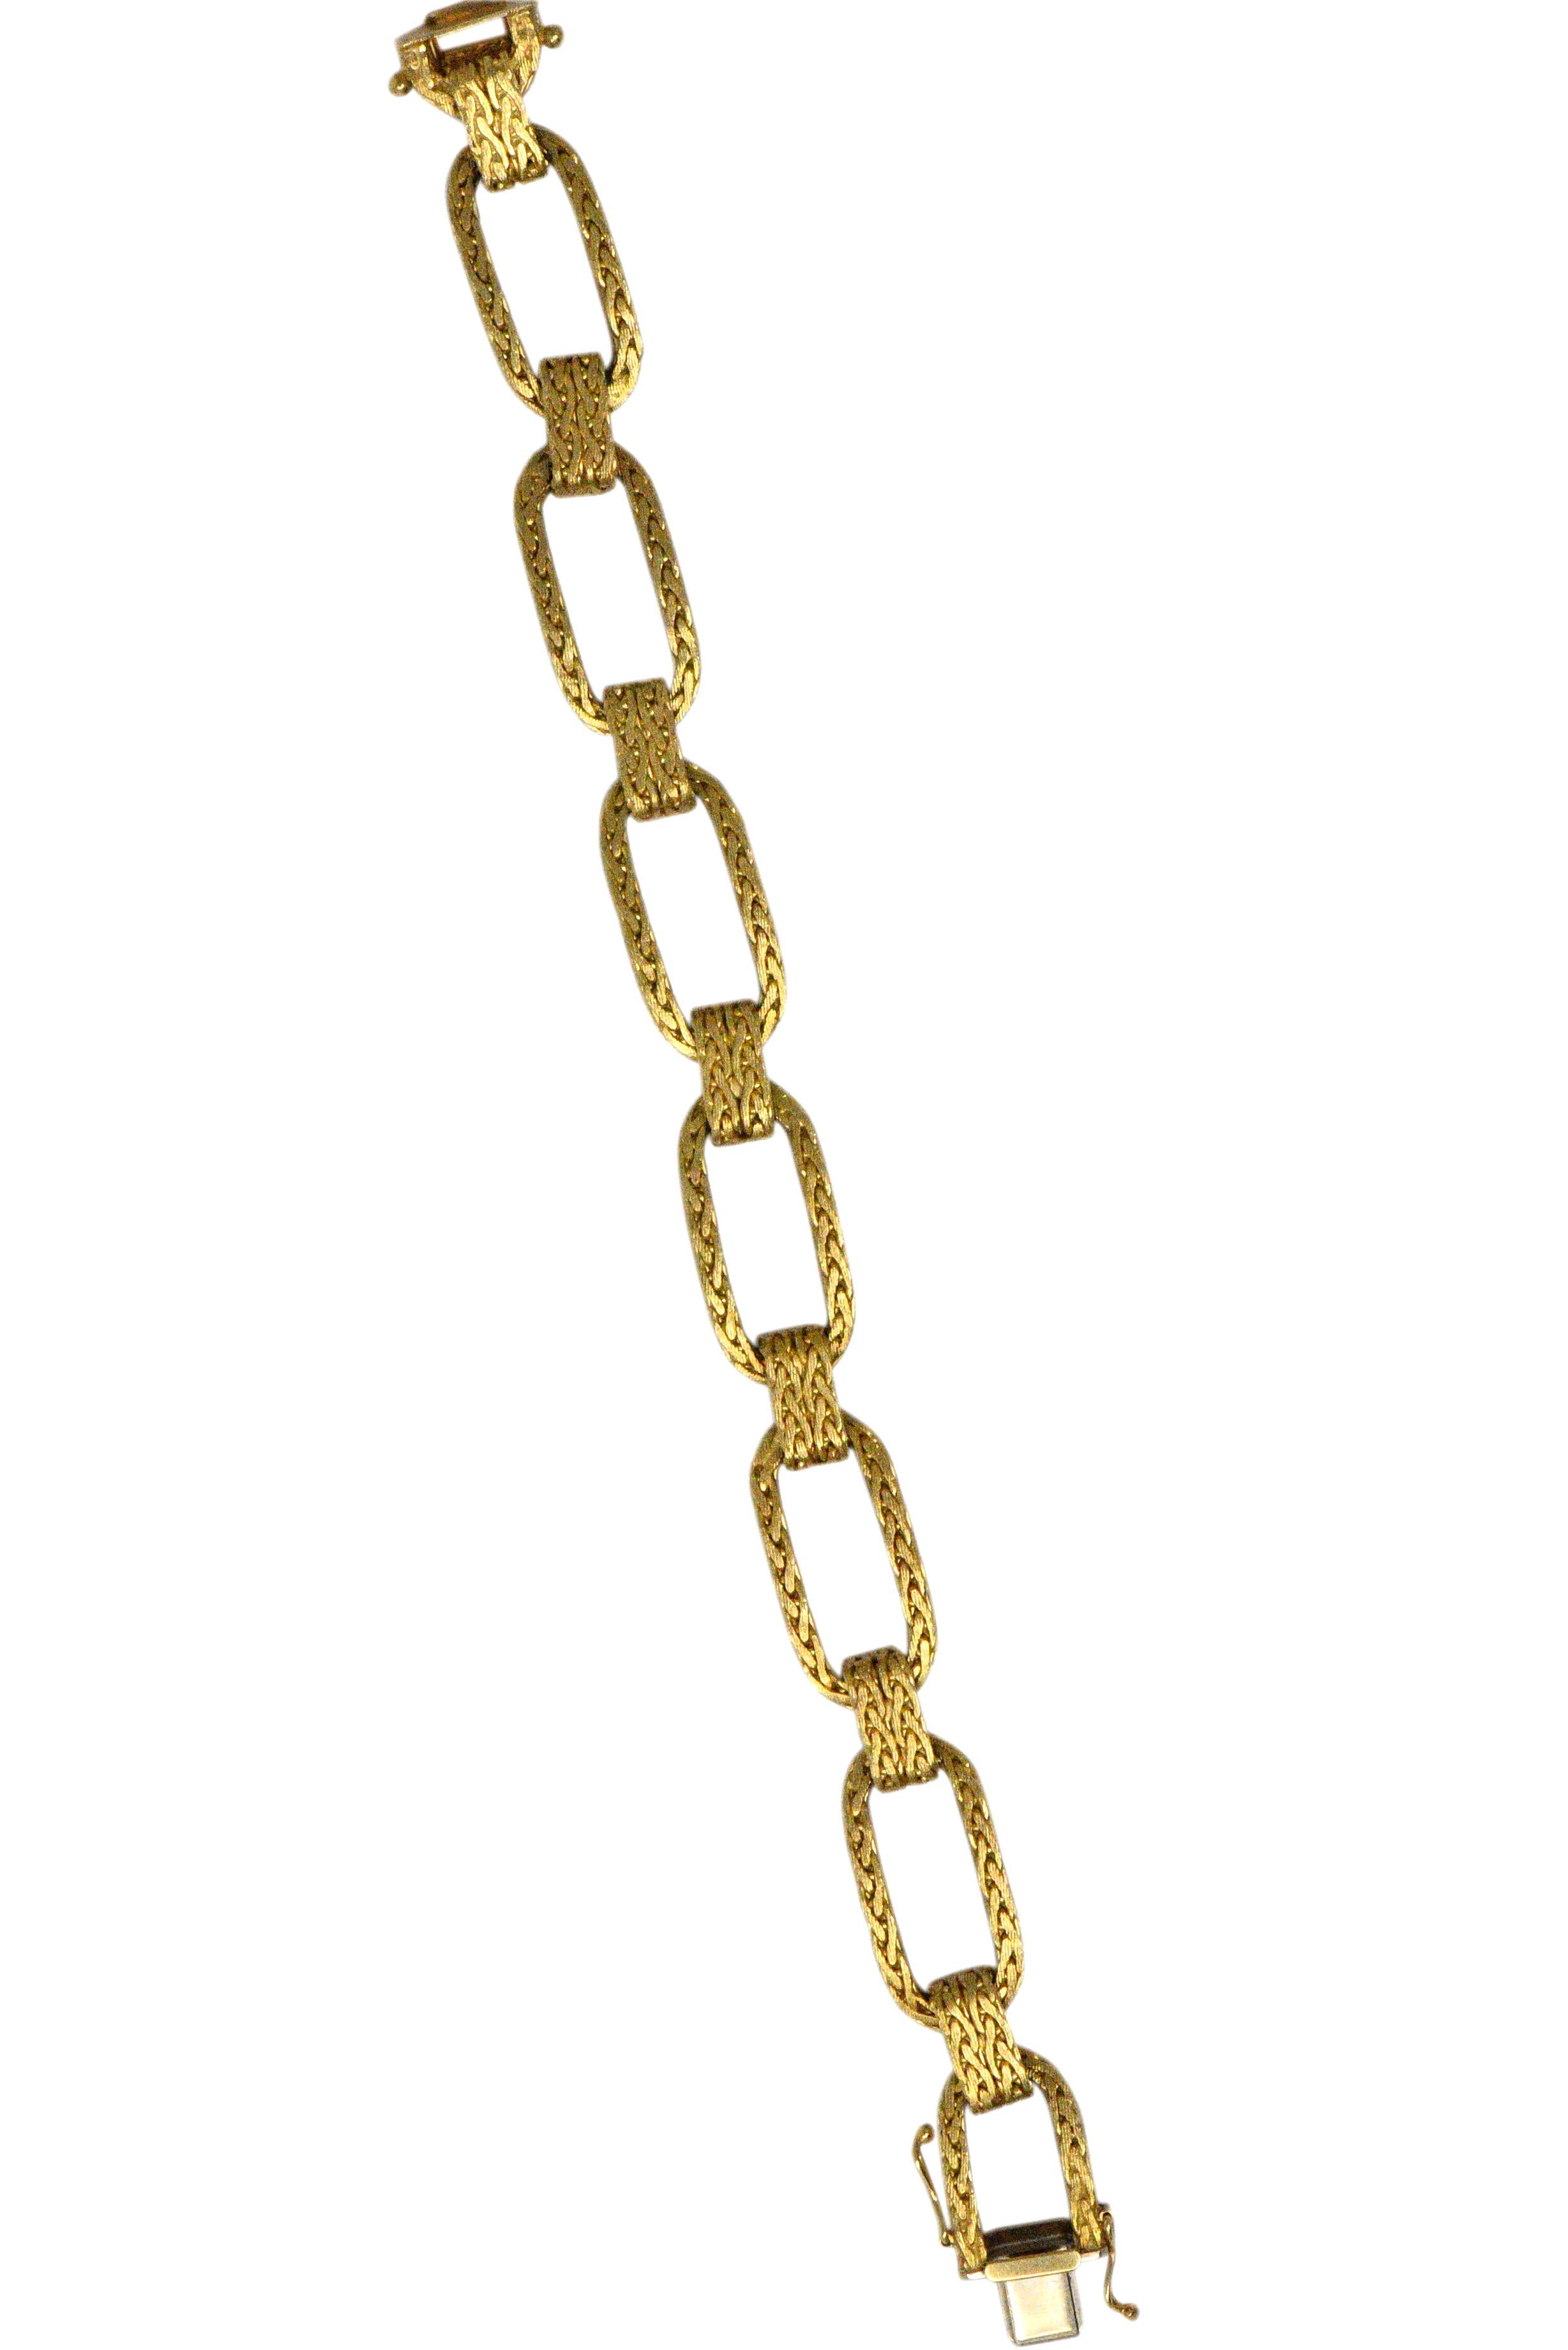 Retro Unoaerre 18 Karat Yellow Gold Link Bracelet

Woven textured gold in an elongated cable style

Completed by a concealed clasp with double figure-eight safety

Fully signed Unoaerre with Italian assay marks

Rich glowing gold and classic design